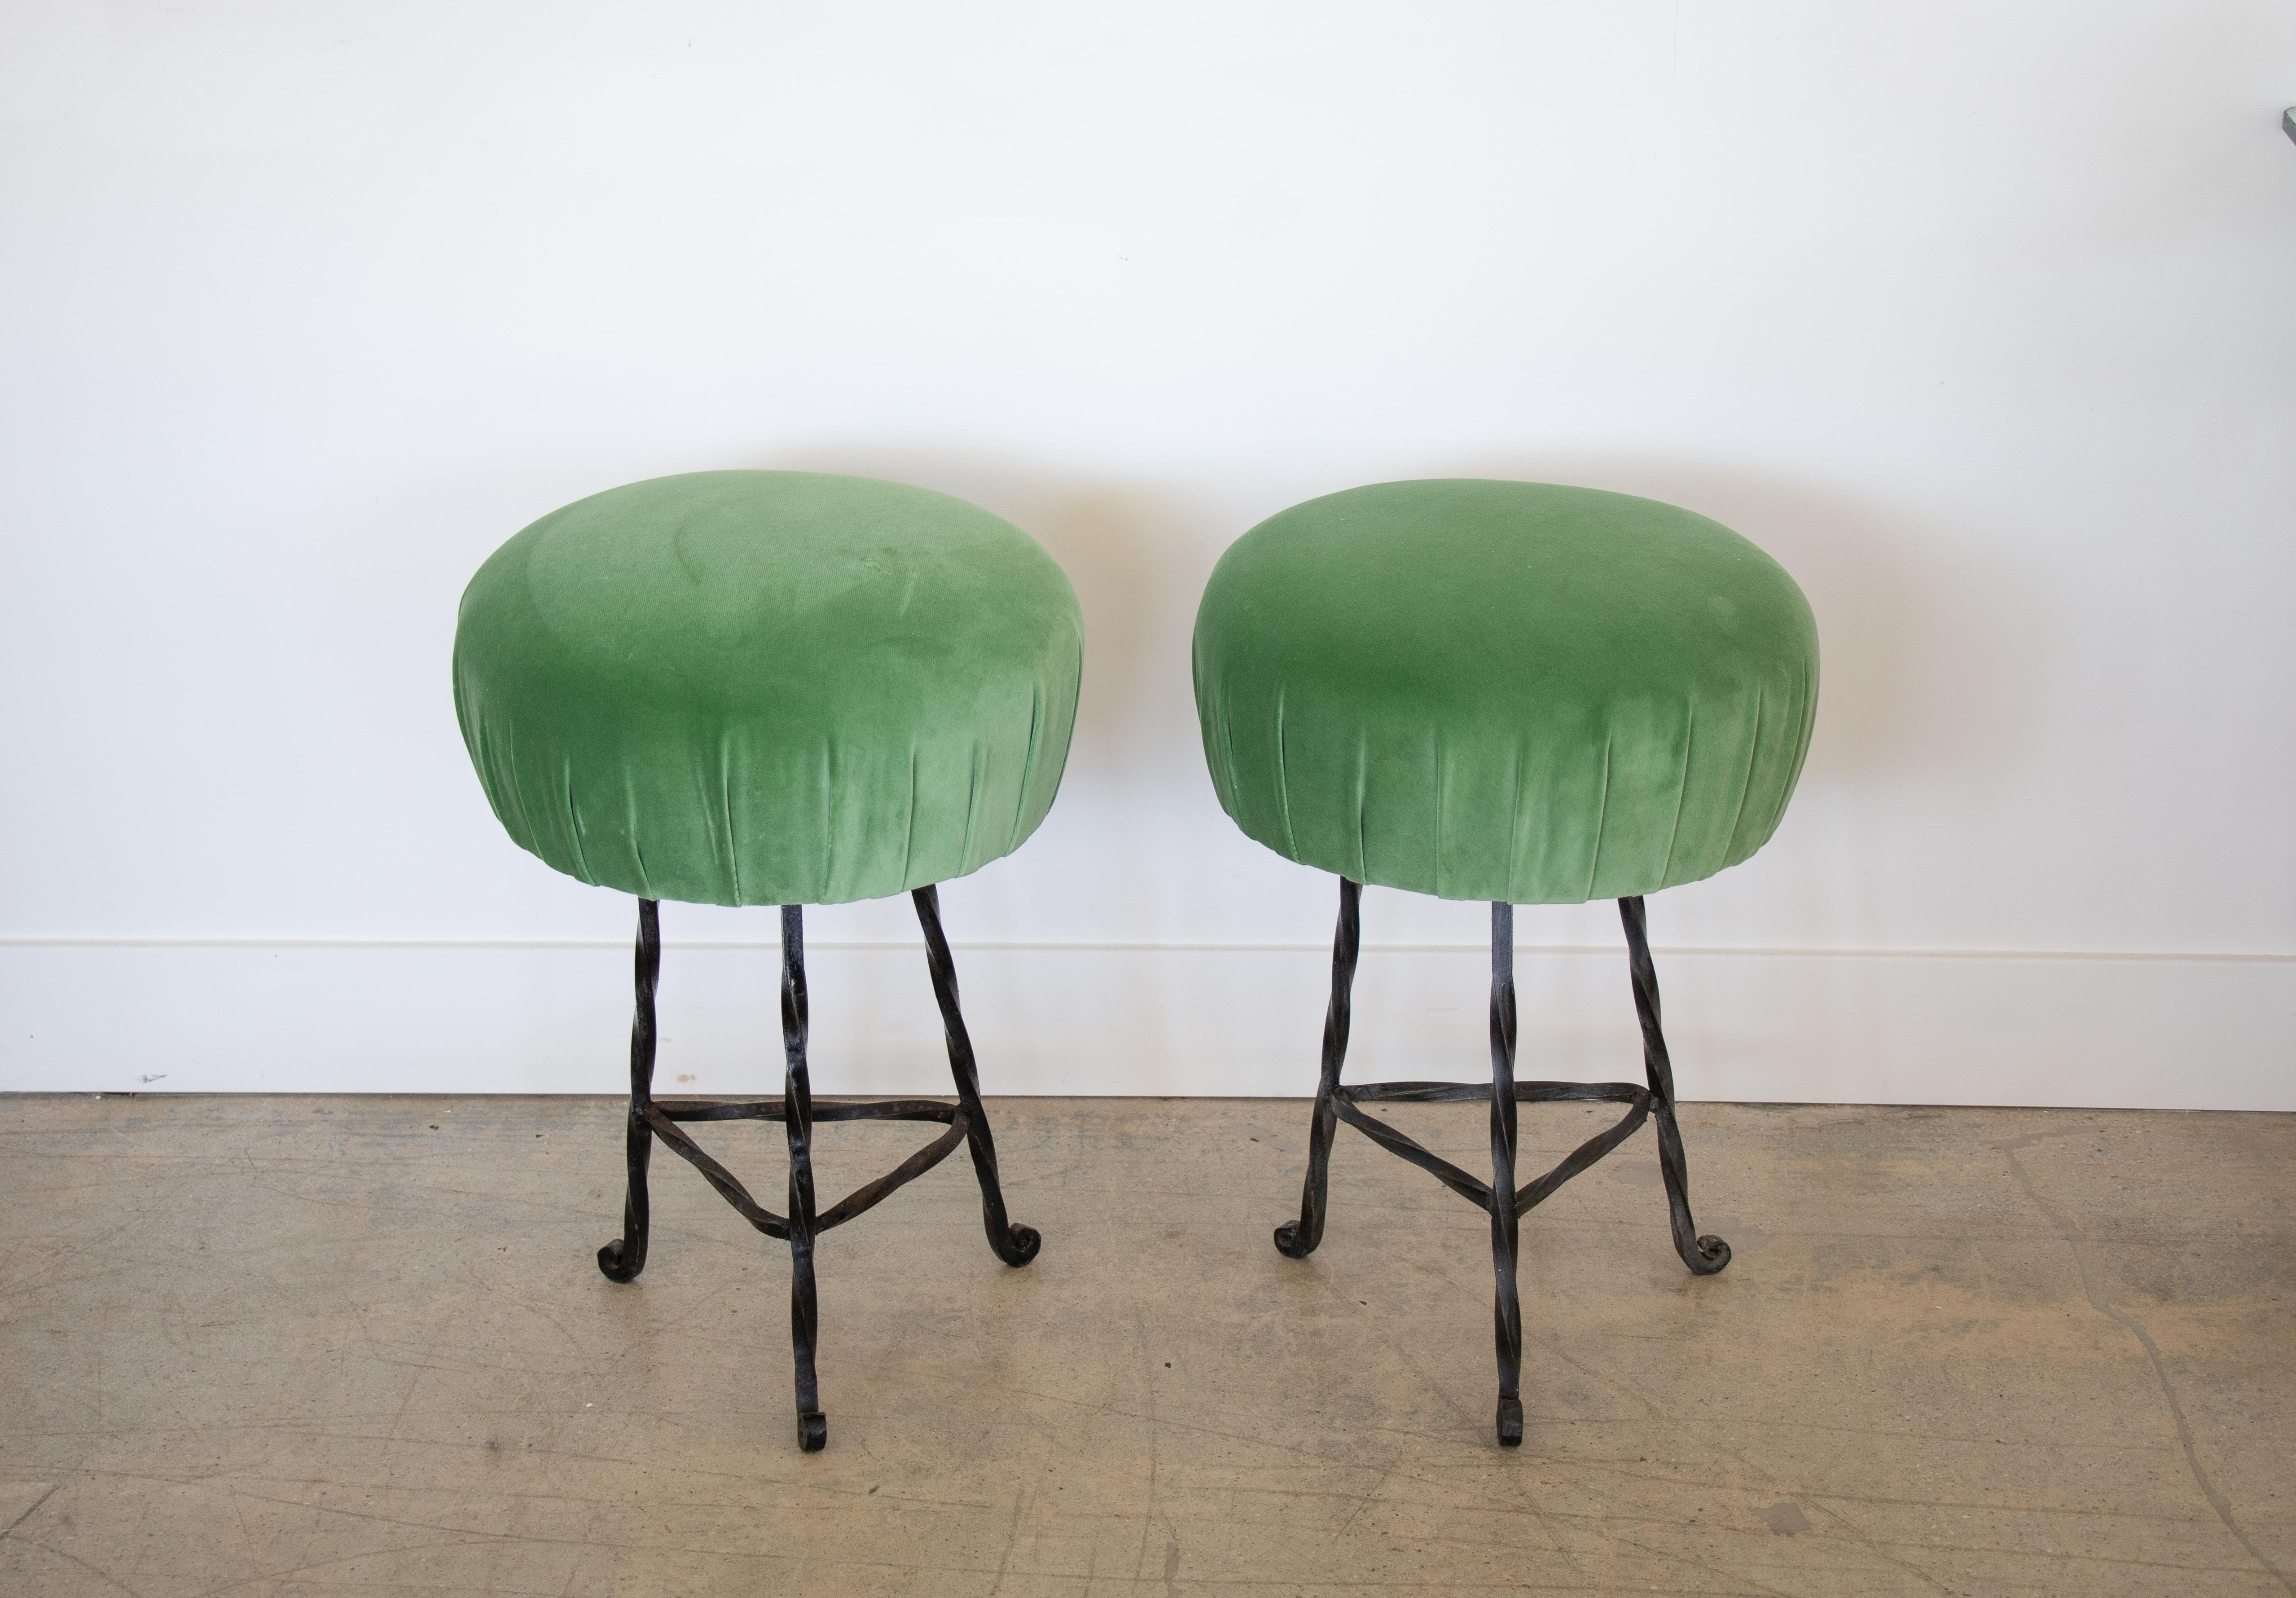 Pair of French twisted iron stools with cushioned. Seats. Black twisted wrought iron base with curled three leg base and newly upholstered round seat in a vibrant green velvet.